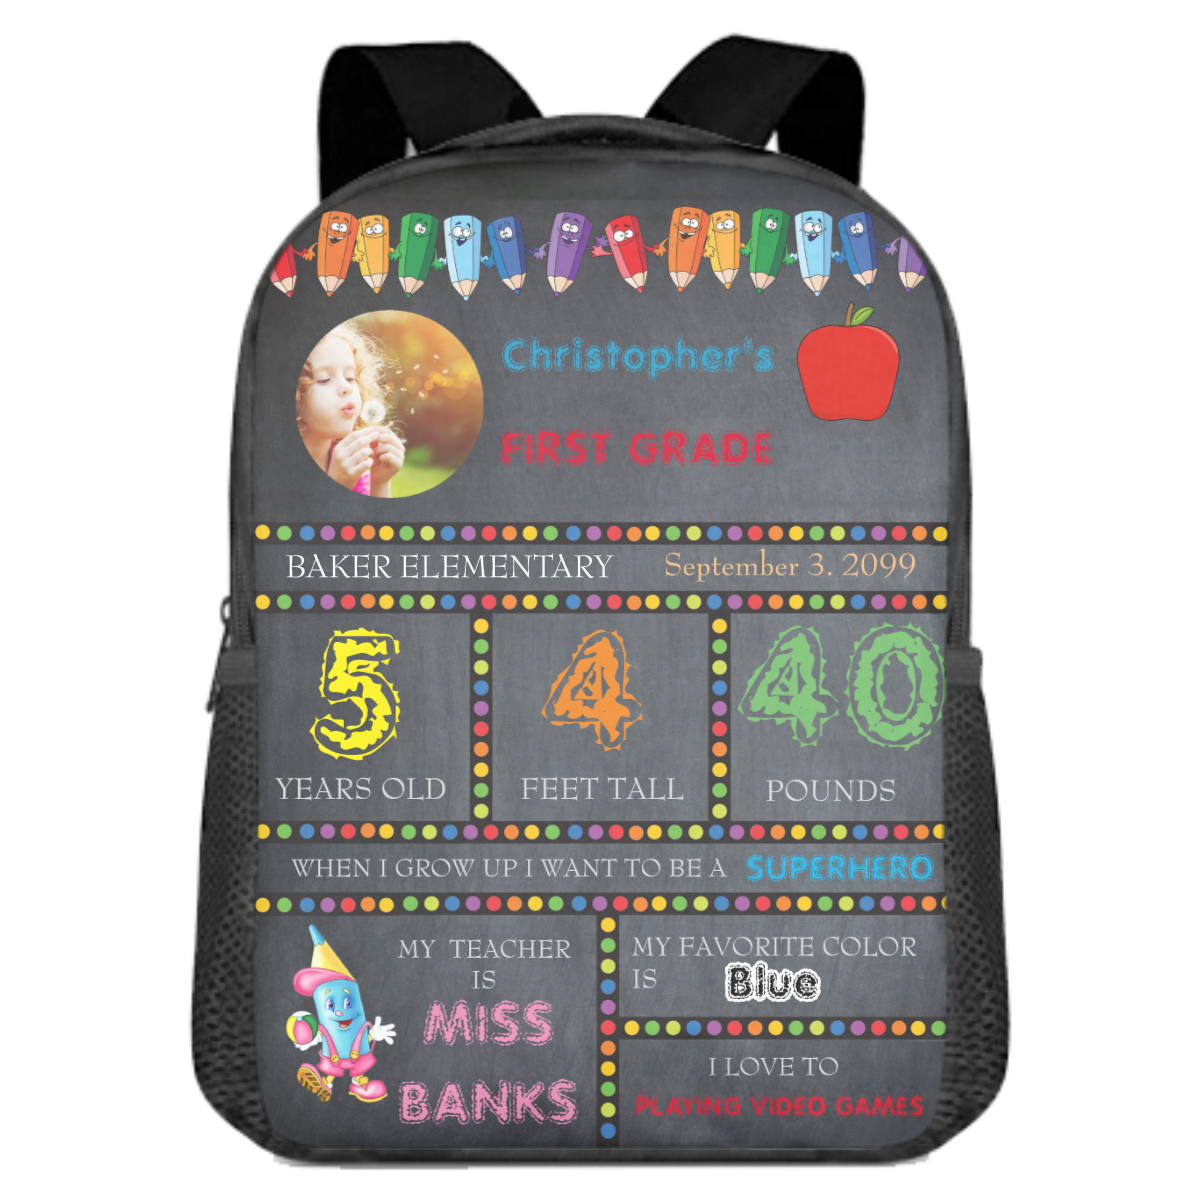 Personalized Photo/Name/Text School Bags